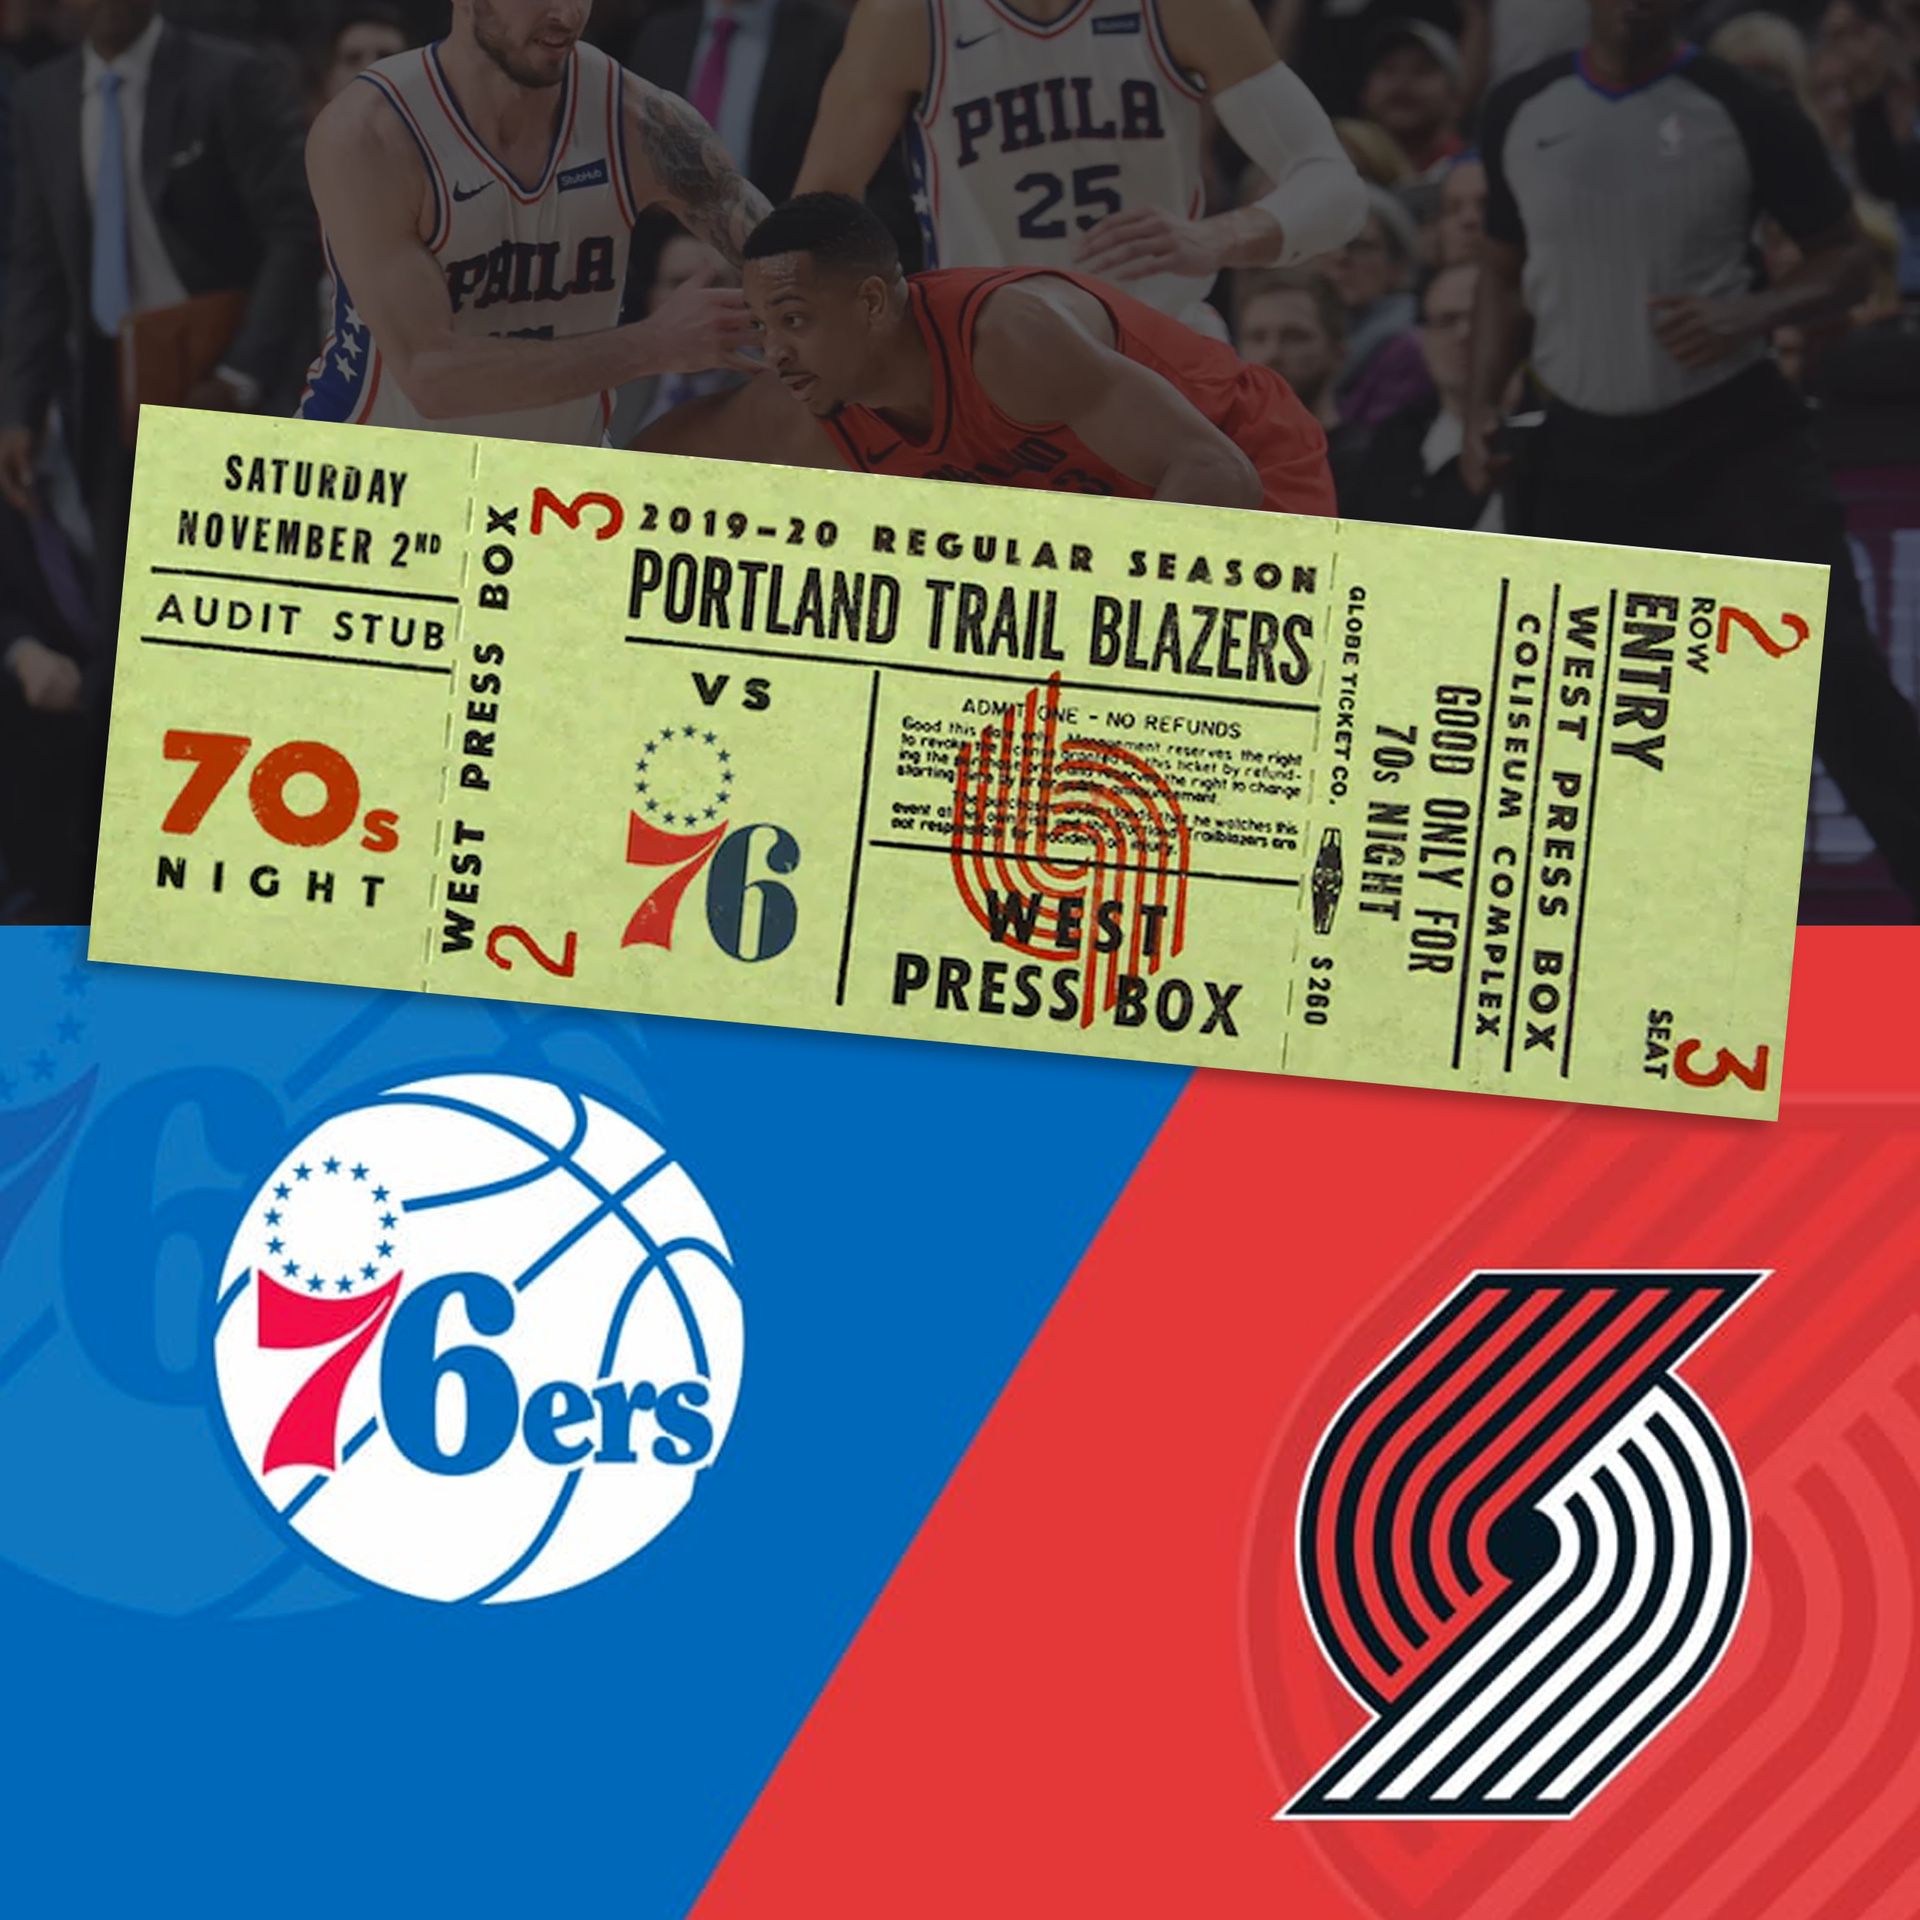 2 tickets to Blazers to 76ers Nov. 2nd (70s night). Section 325 row J